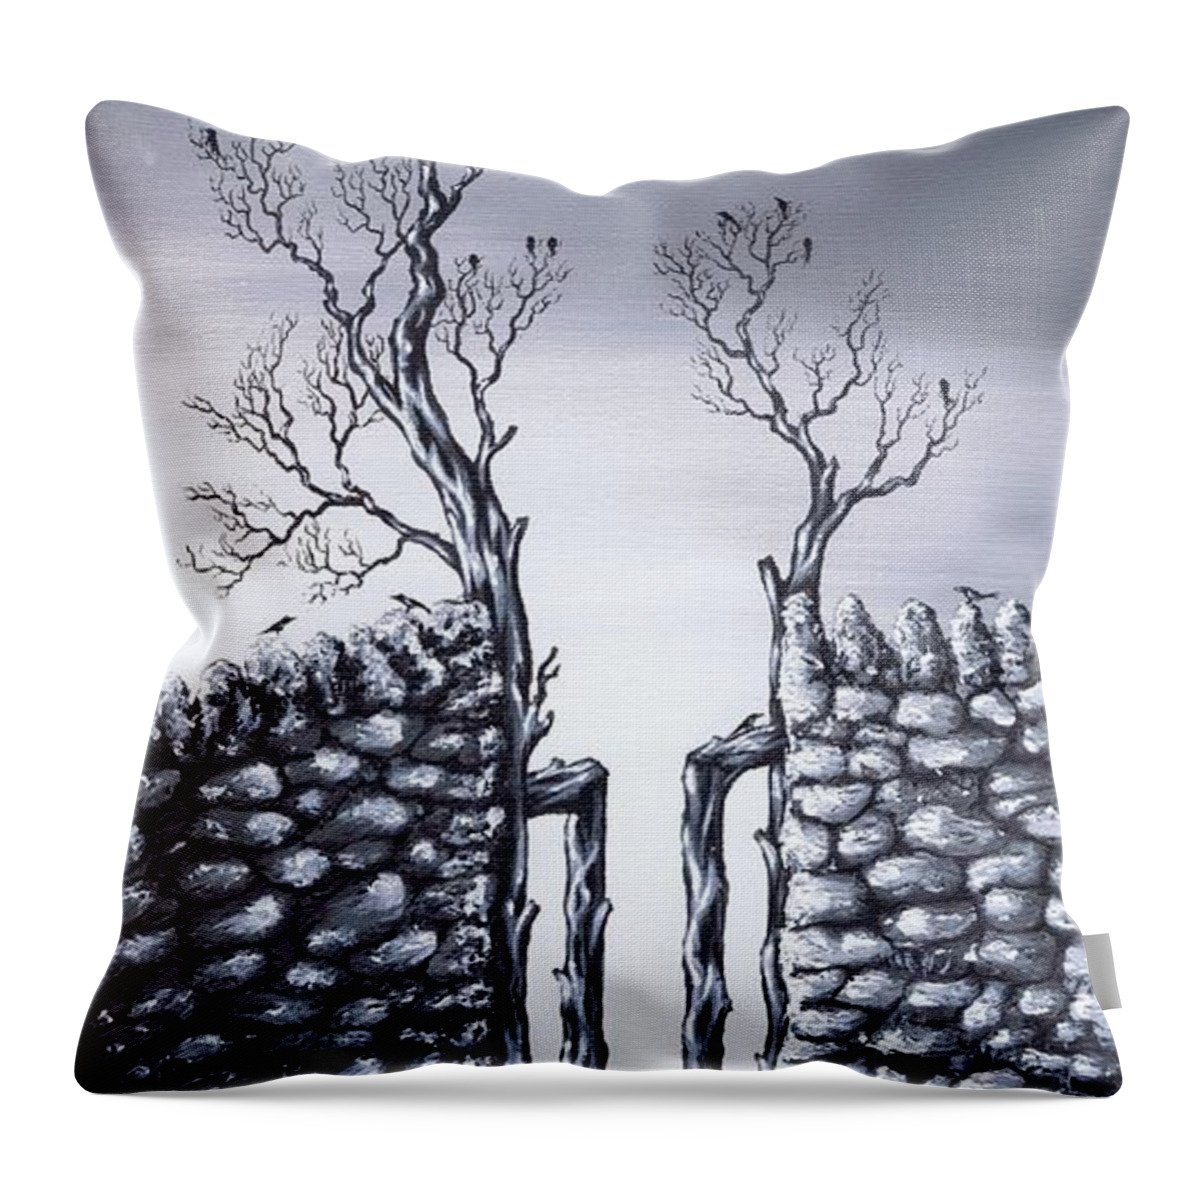 Birds Throw Pillow featuring the painting Bird Tree by Kenneth Clarke